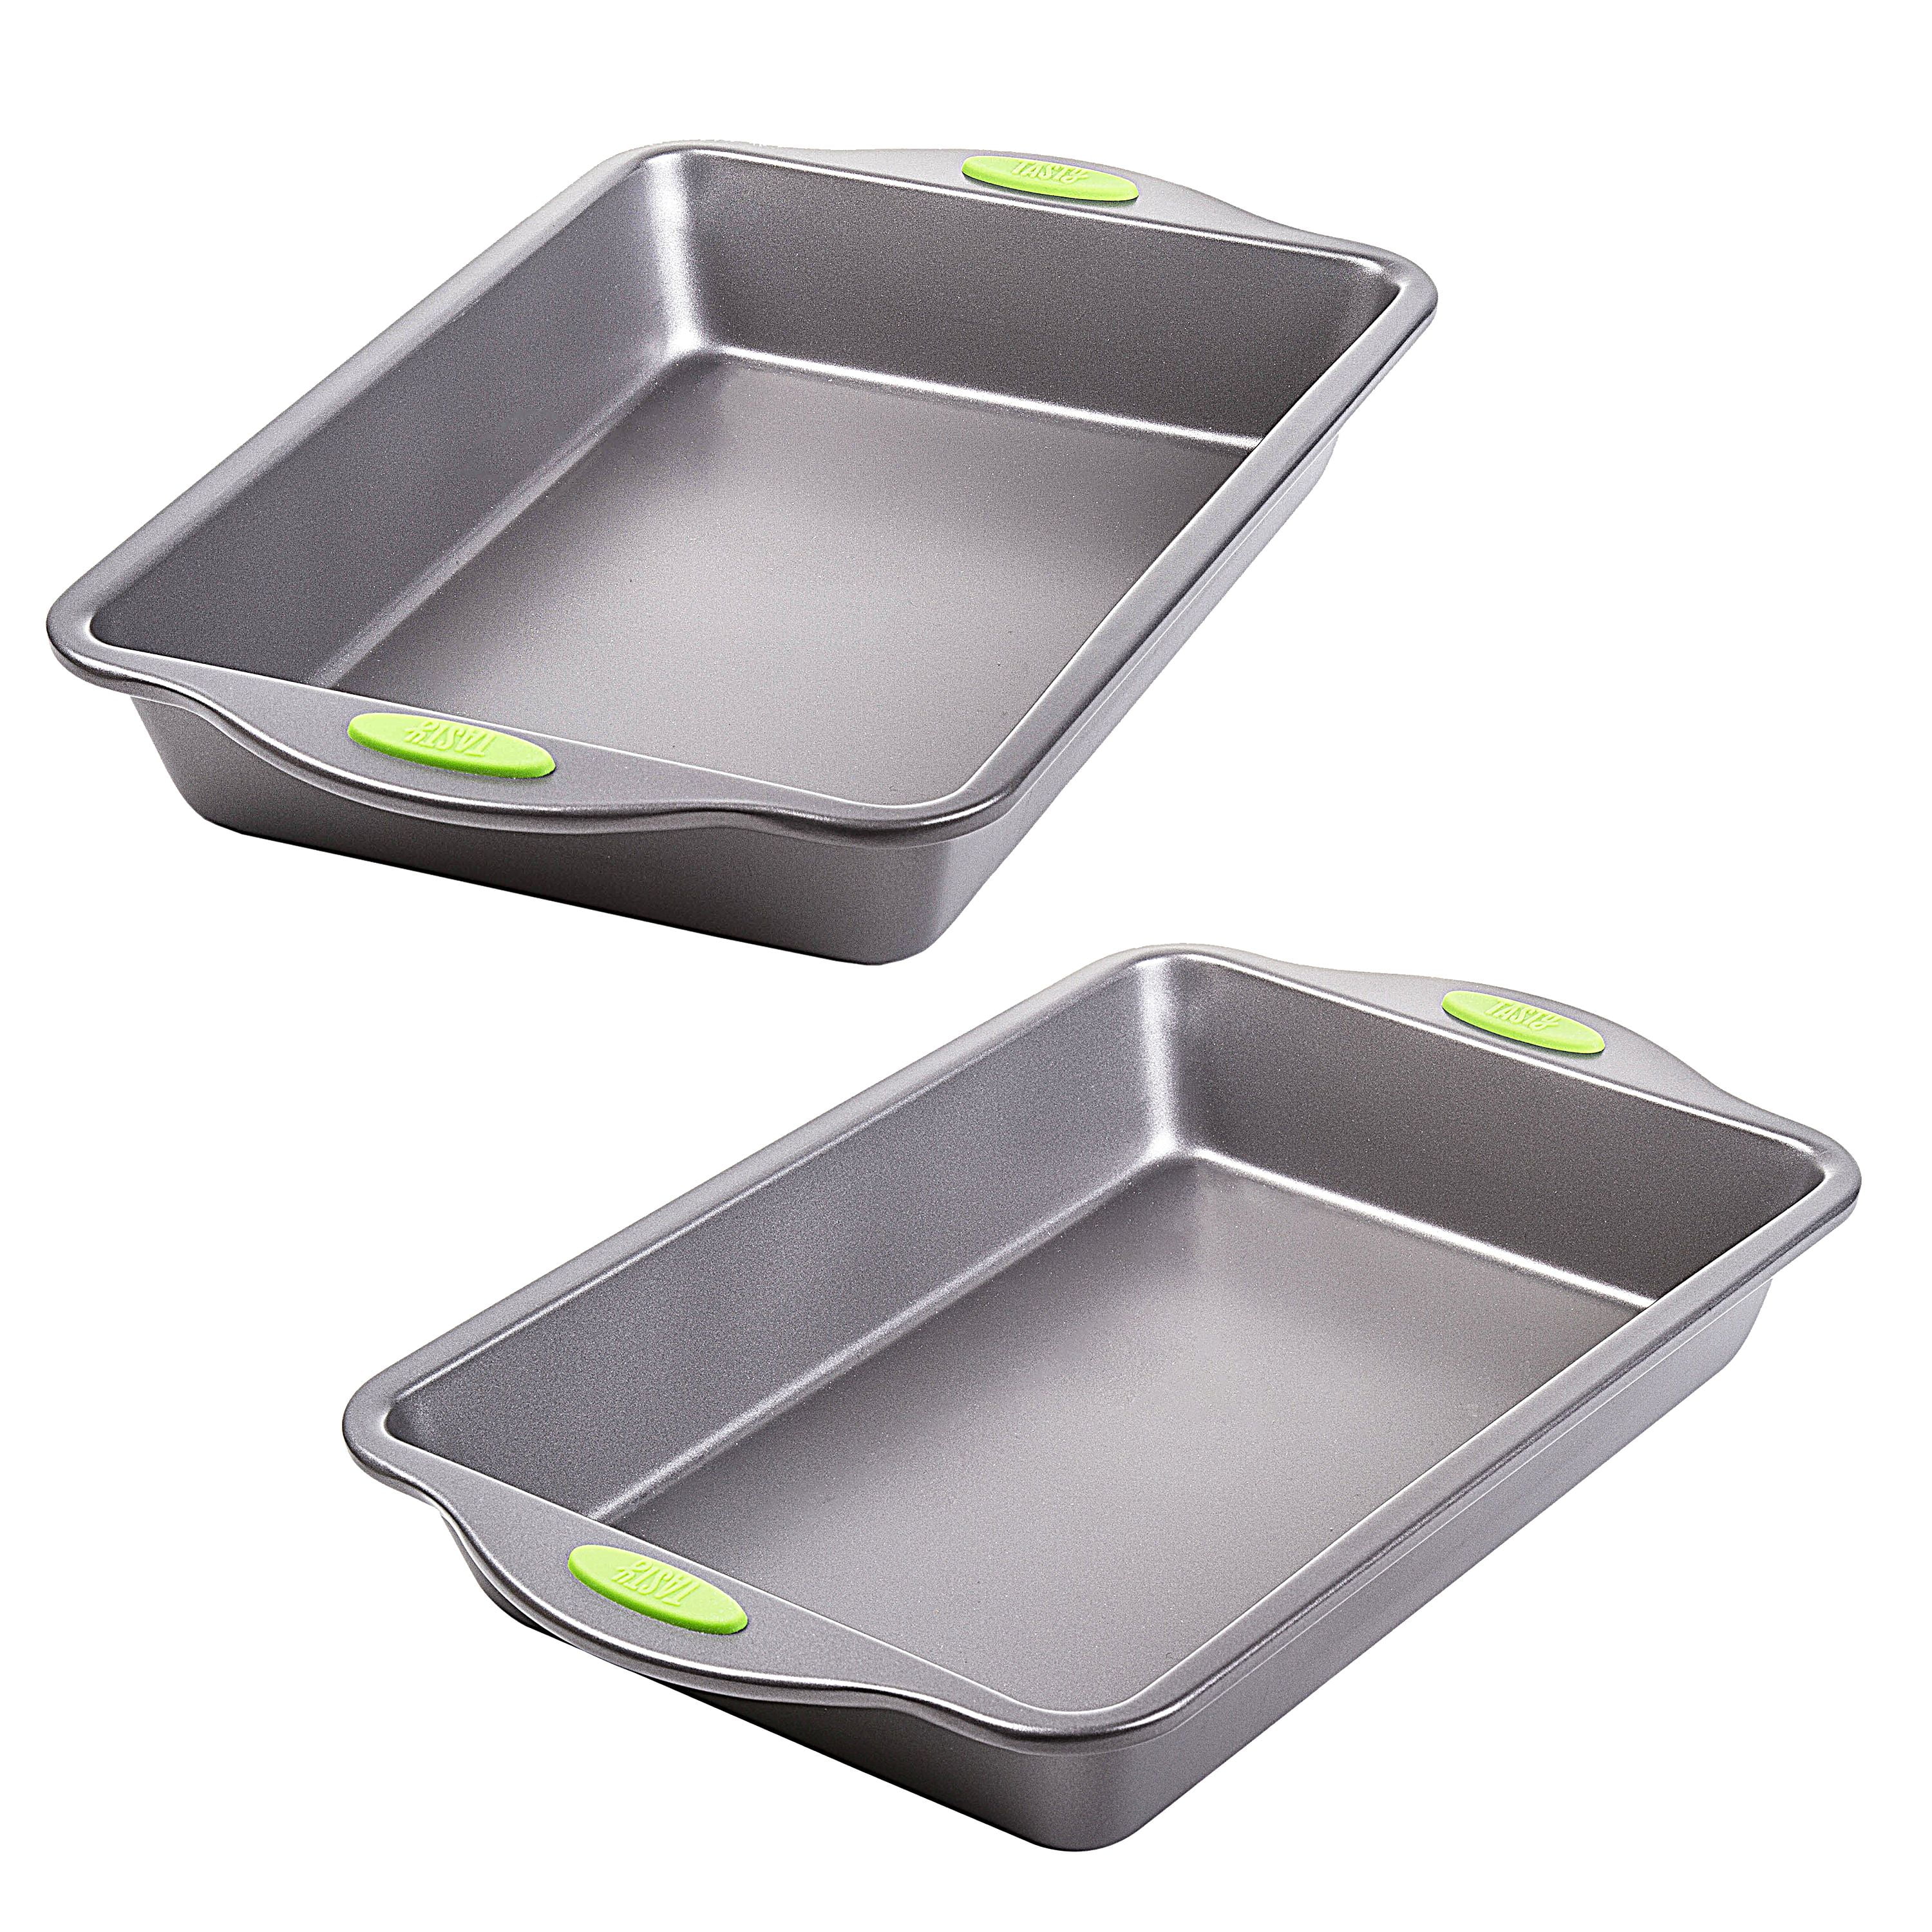 This Shopper-Loved Baking Pan Set Is Only $13 Right Now